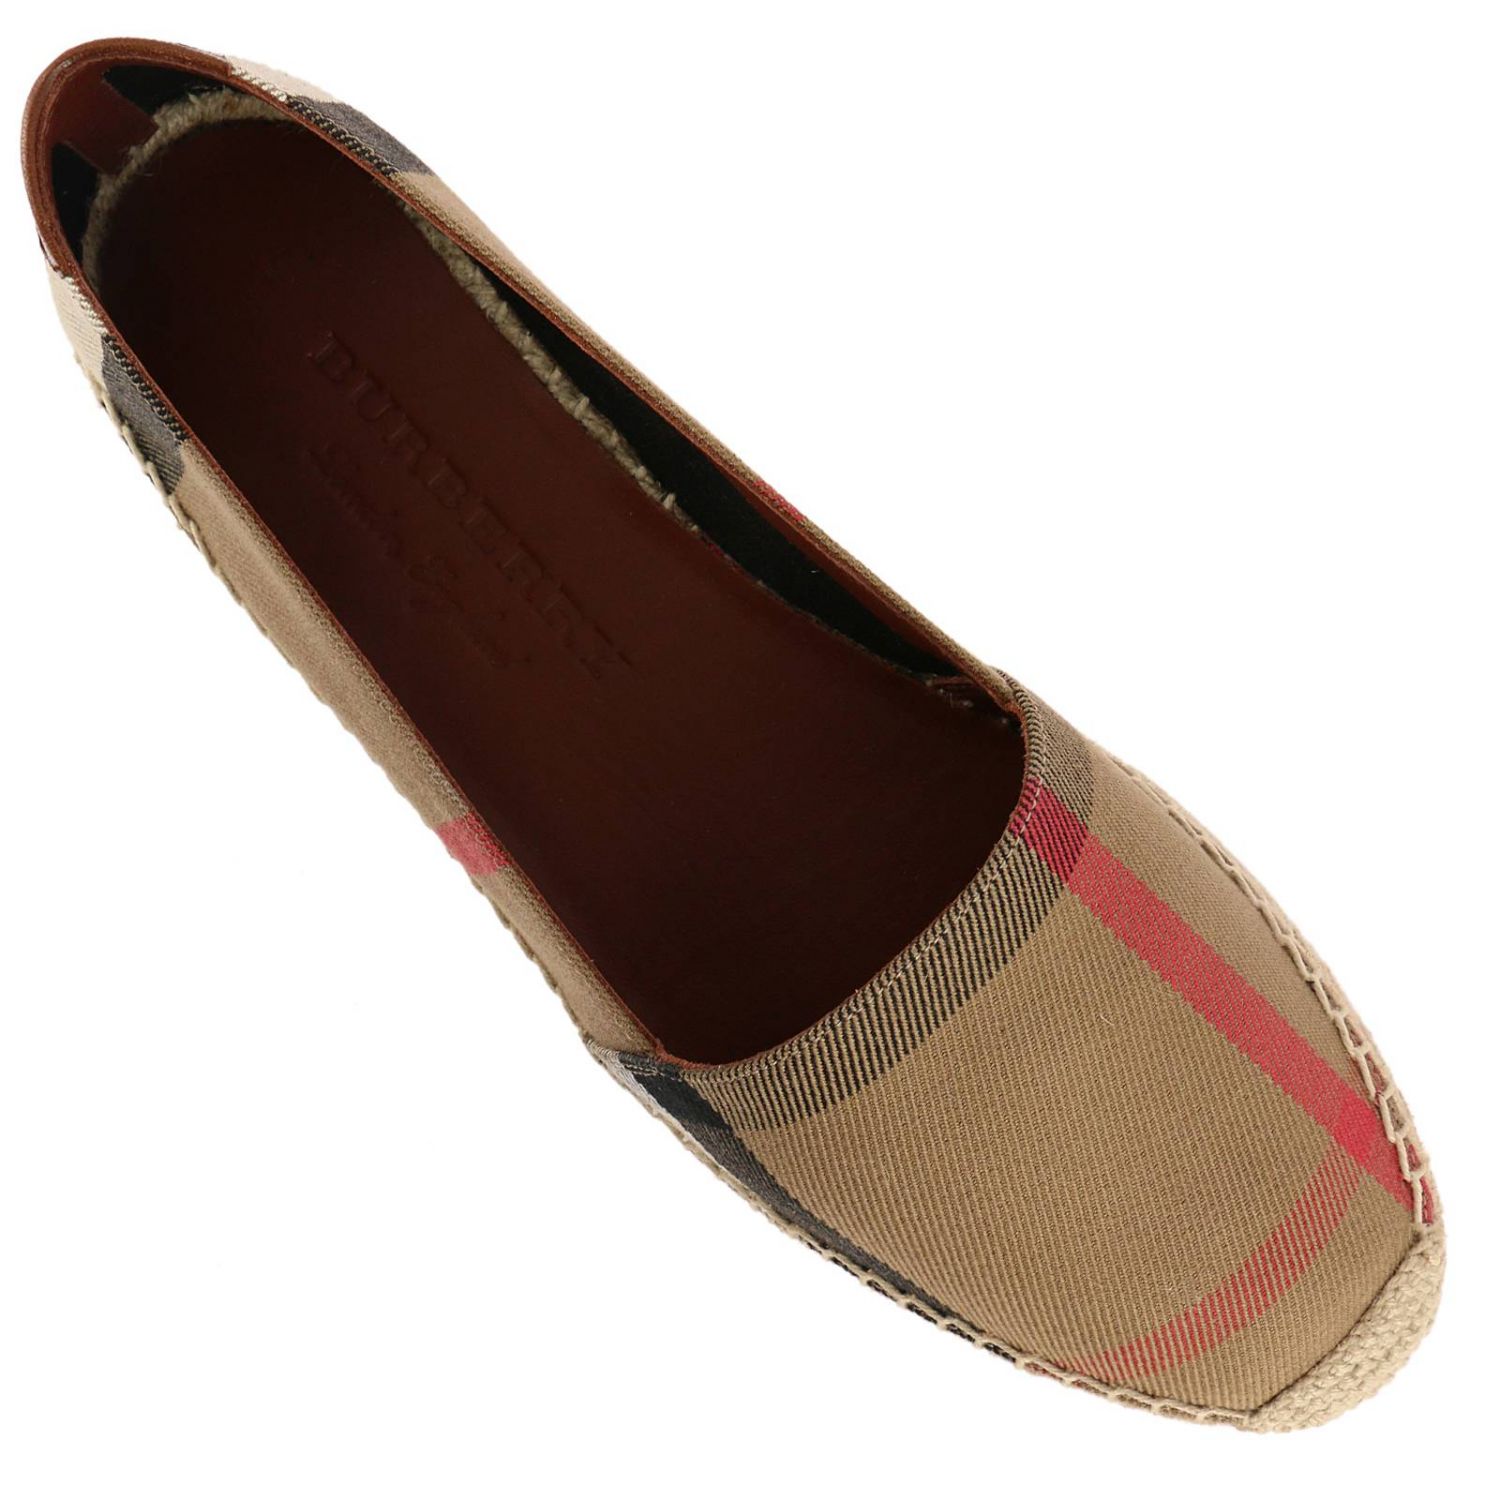 Burberry Outlet: Shoes women | Shoes Burberry Women Beige | Shoes Burberry 4054066 GIGLIO.COM